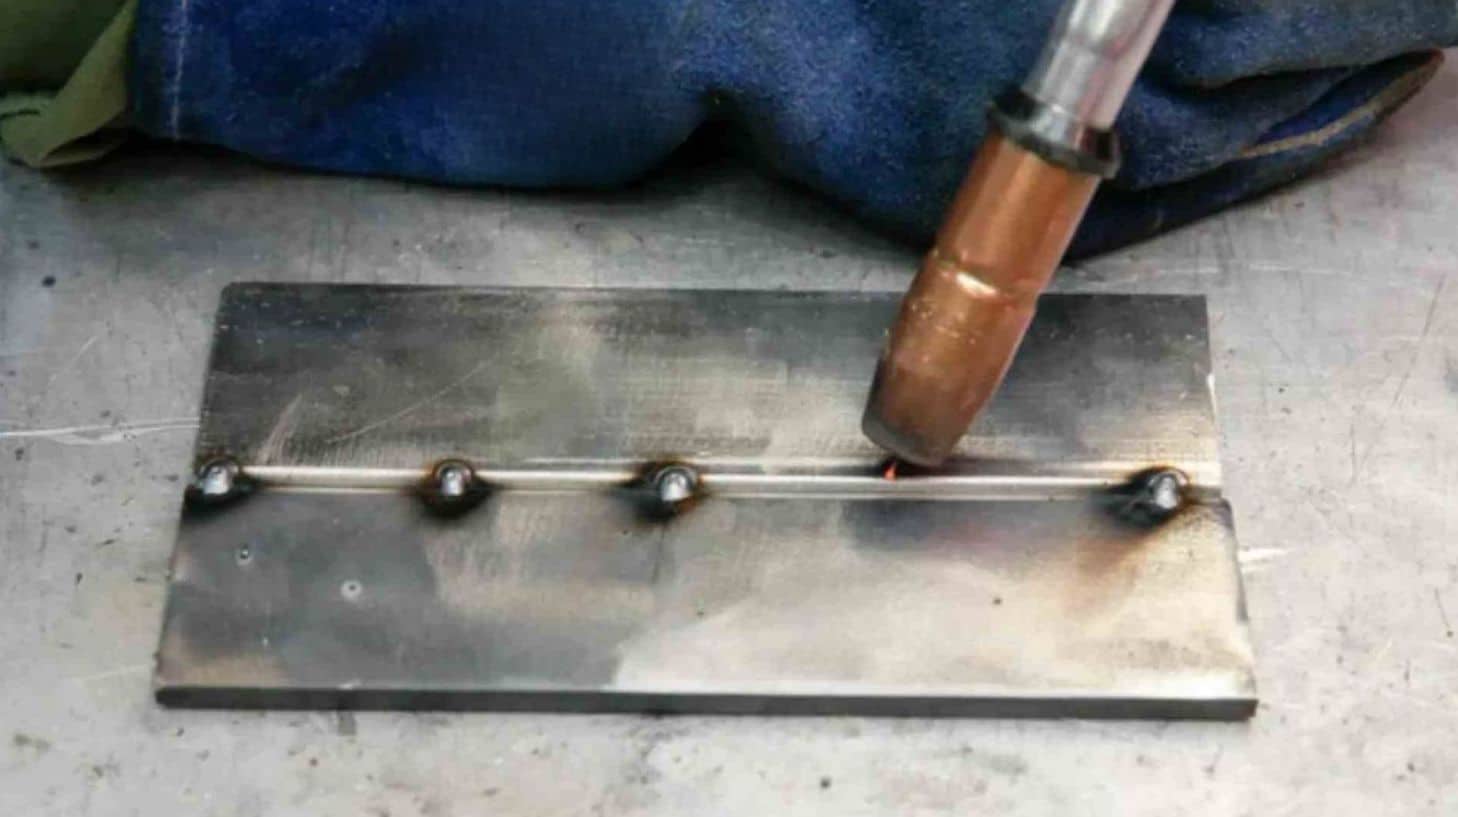 Image of tack welding process